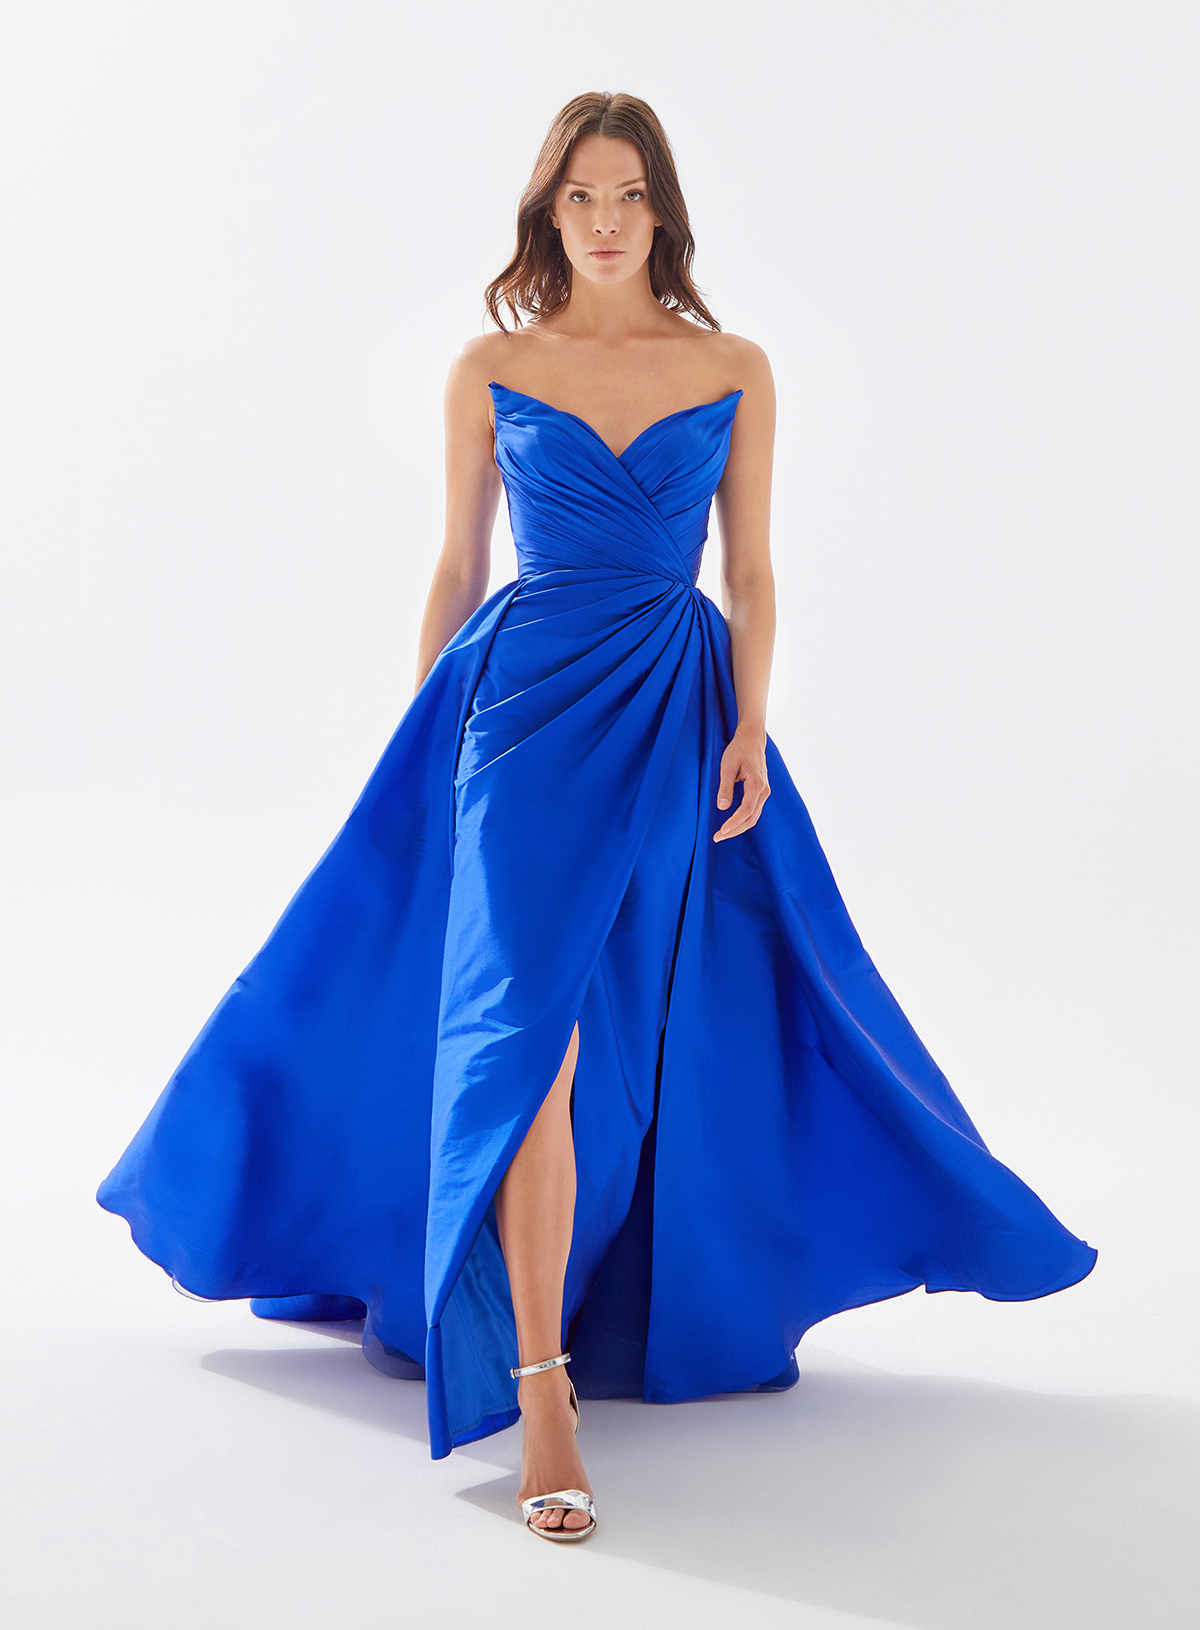 Picture of Tessa Royal Blue Dress